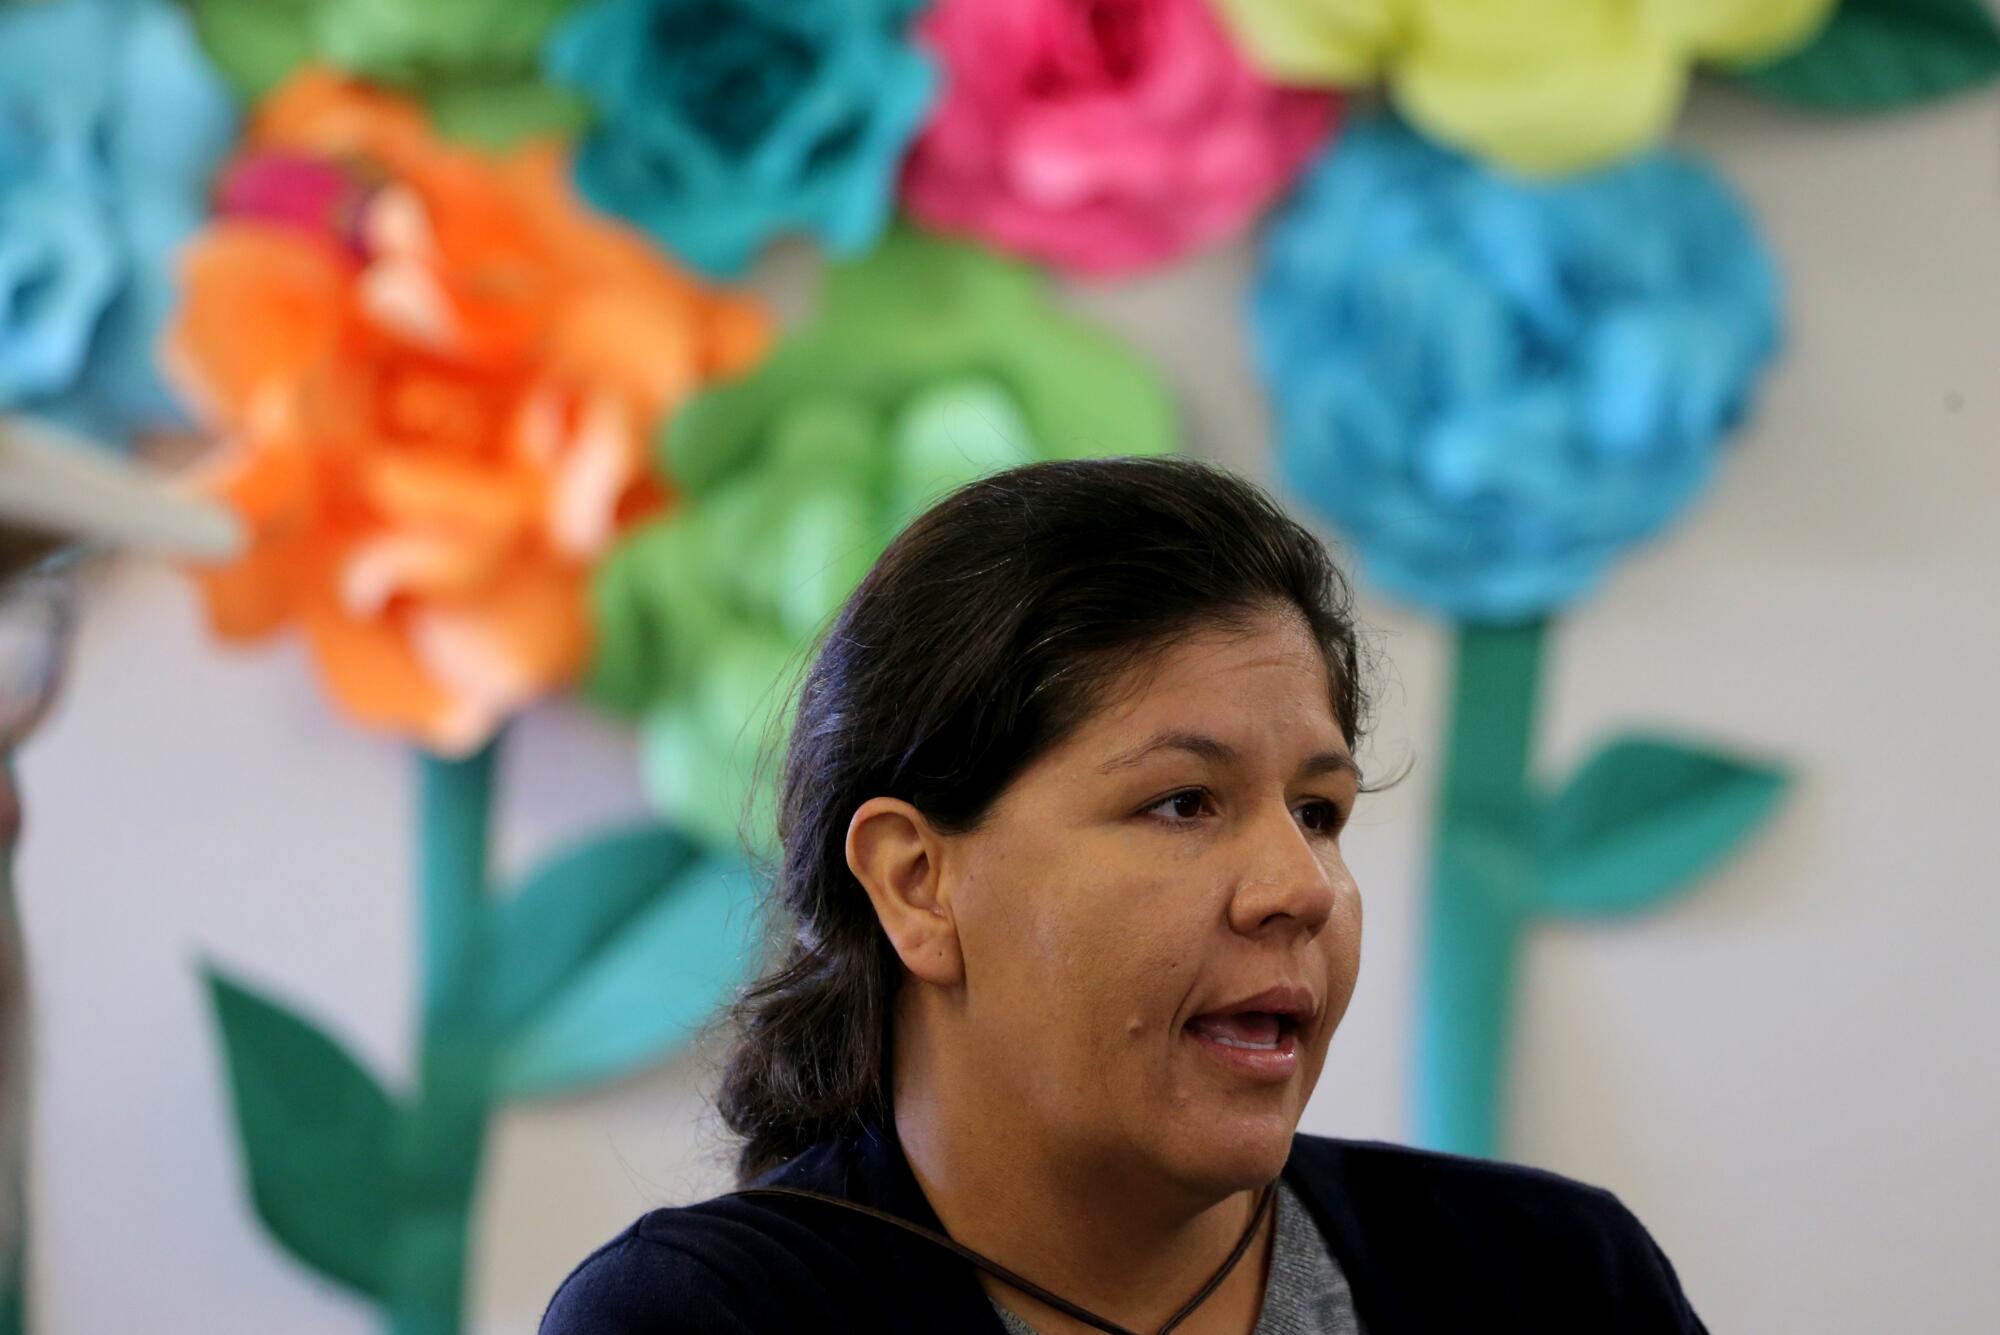 Rosalba Fonseca is a community advocate who works with farmworkers in the Cuyama Valley.